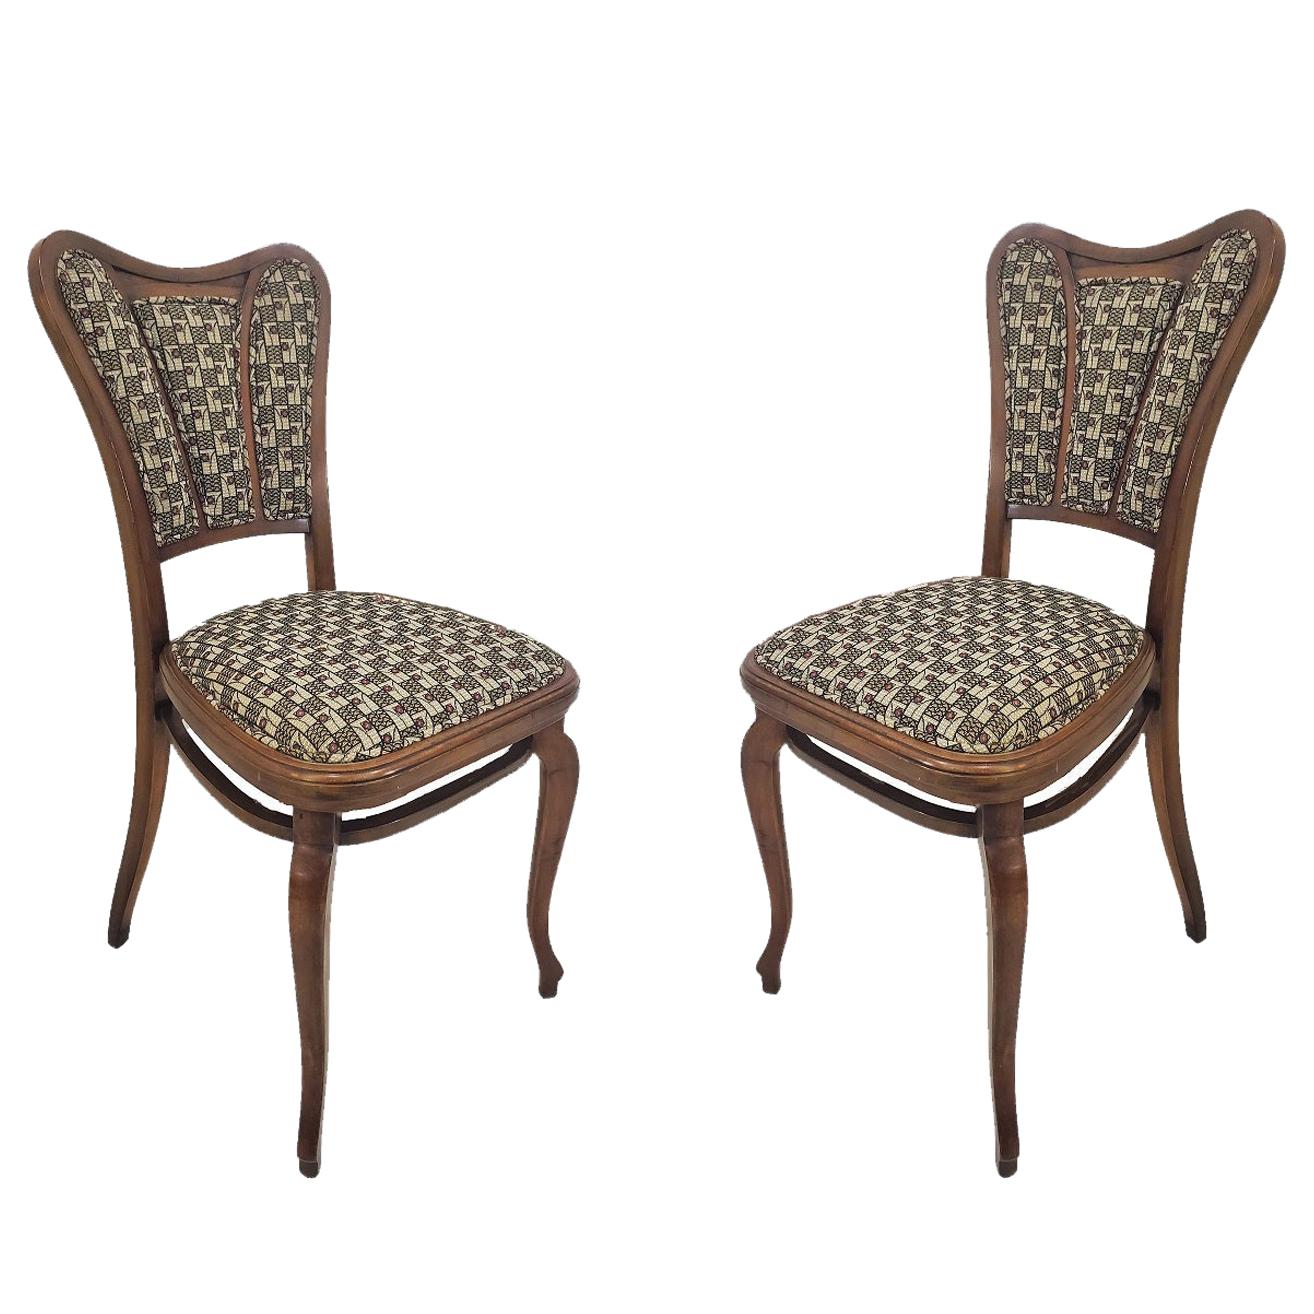 Pair of Austrian Art Nouveau Upholstered Bentwood Side Chairs